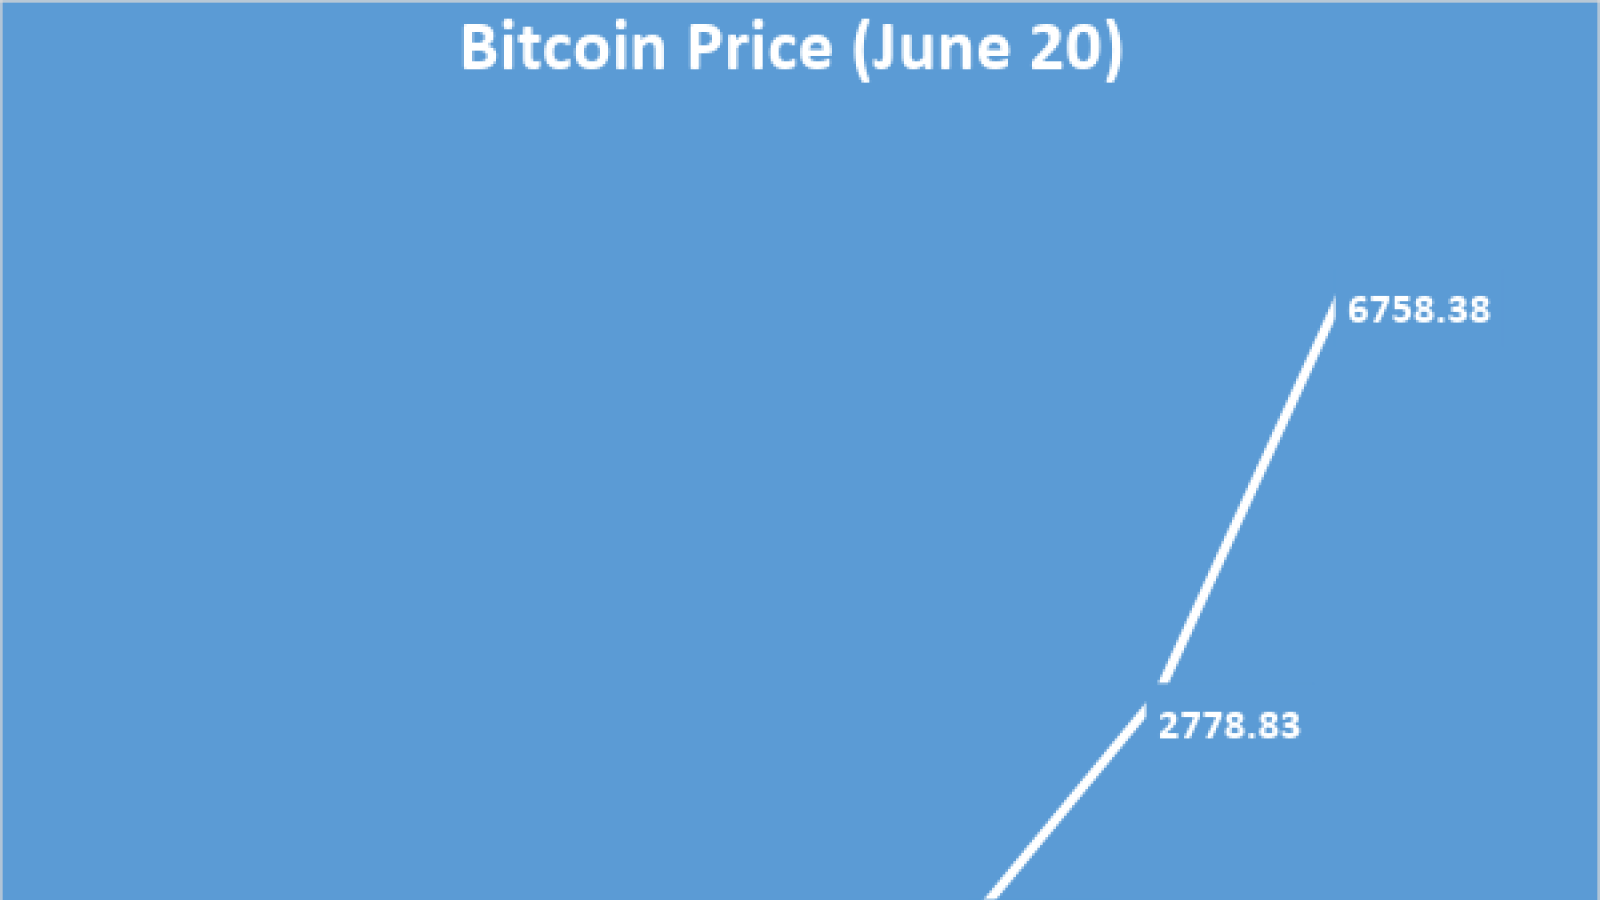 The graph shows a rapid increase of the Bitcoin price over the last 2 years